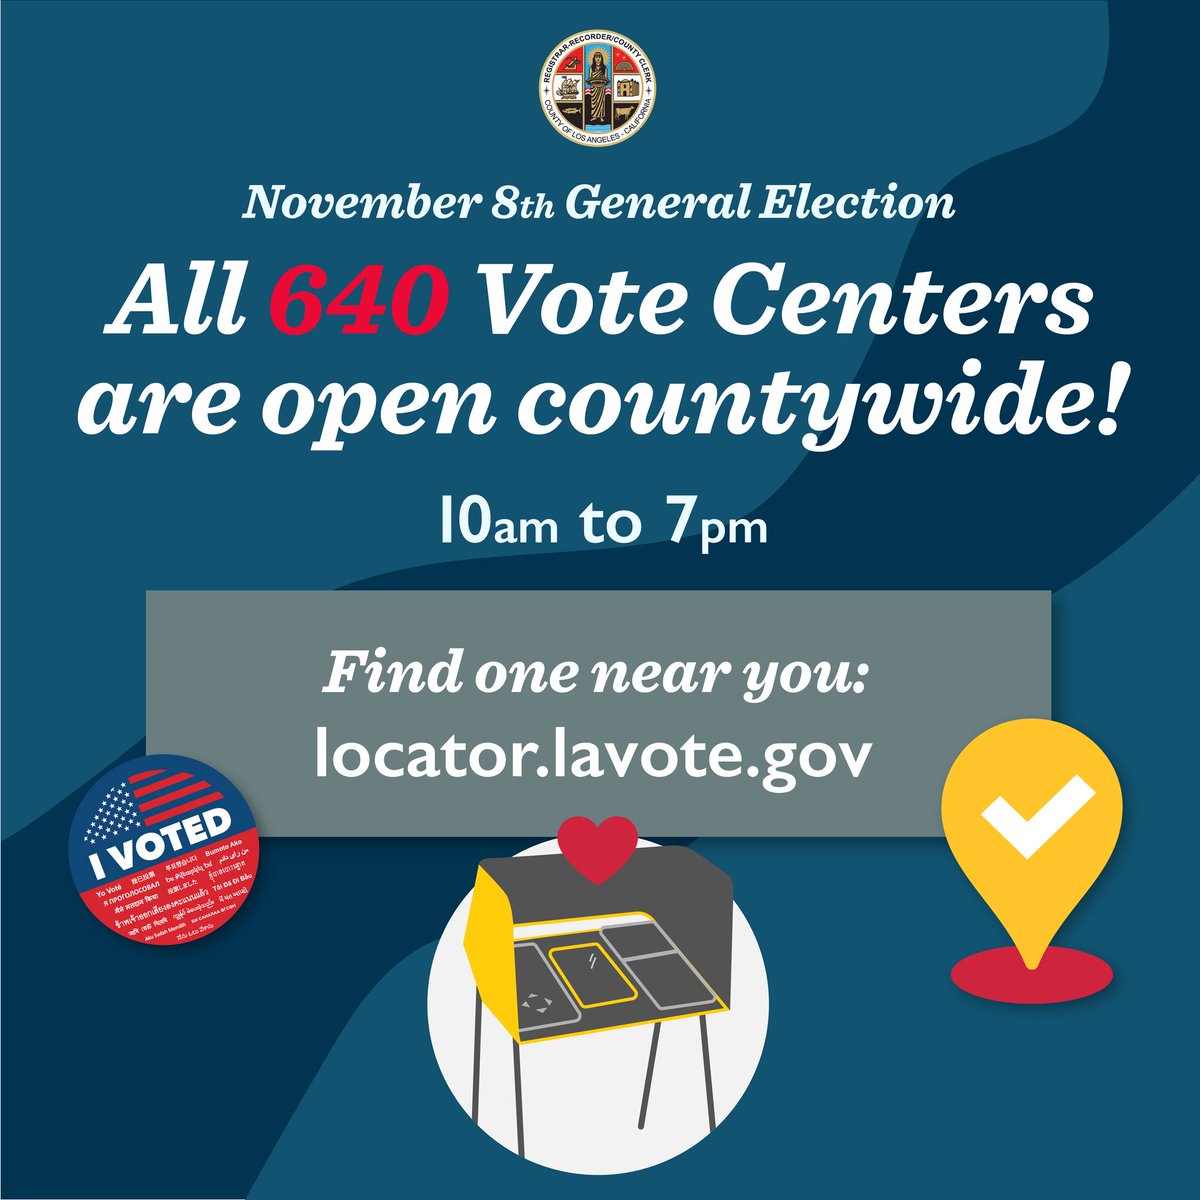 🗳️ Tomorrow is the official Election day! But why wait? Vote Centers are open! Find yours at locator.lavote.gov